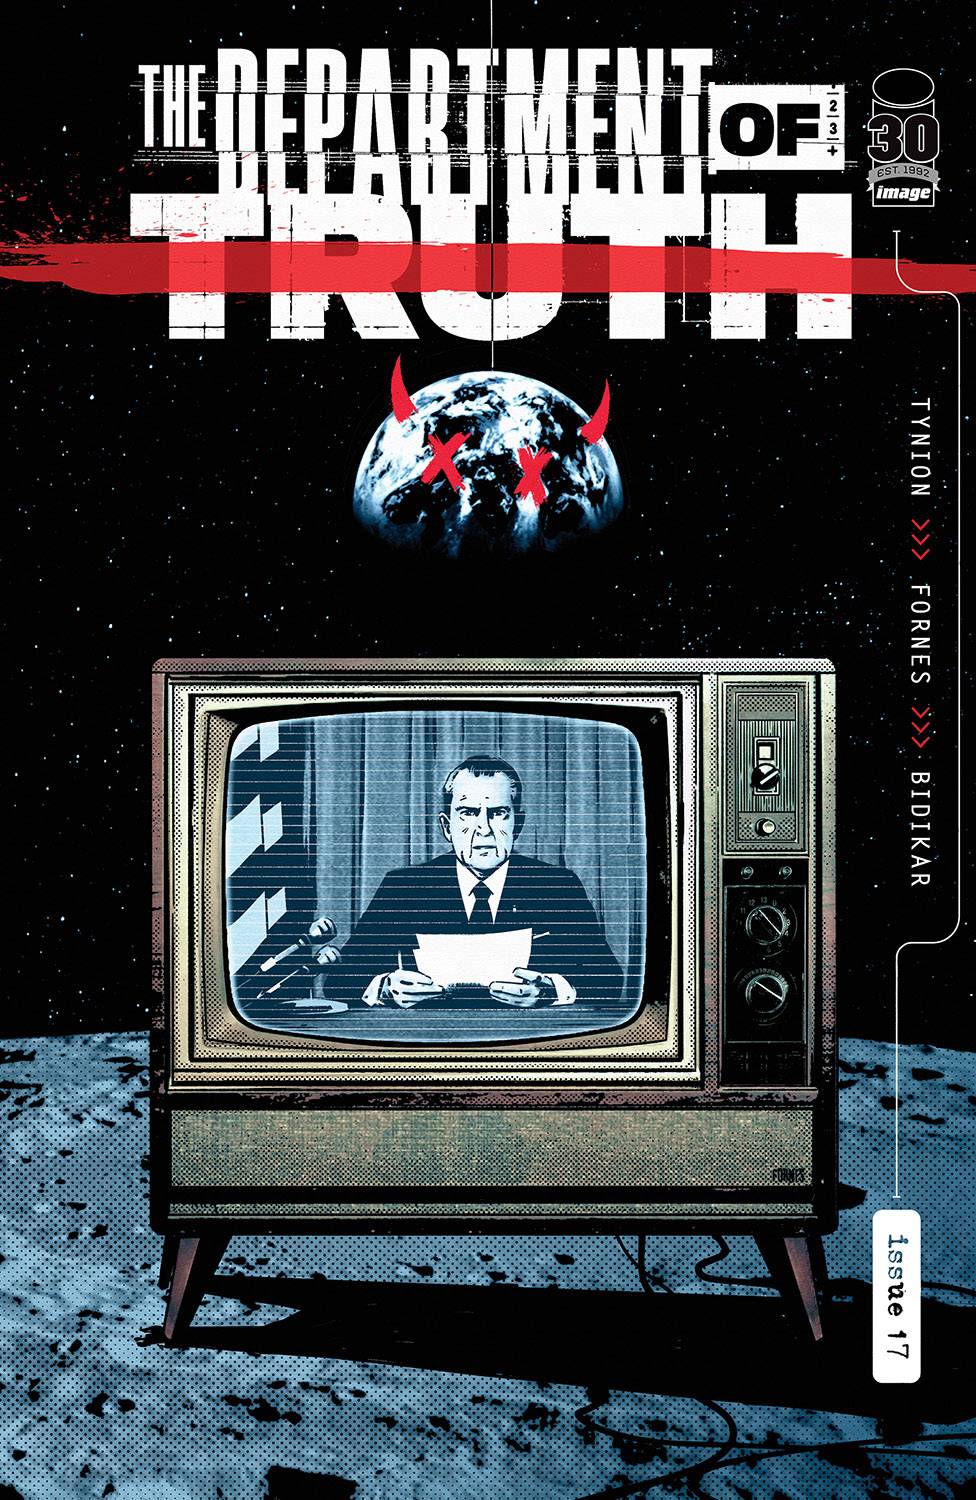 DEPARTMENT OF TRUTH #17 COVER B FORNES - Third Eye